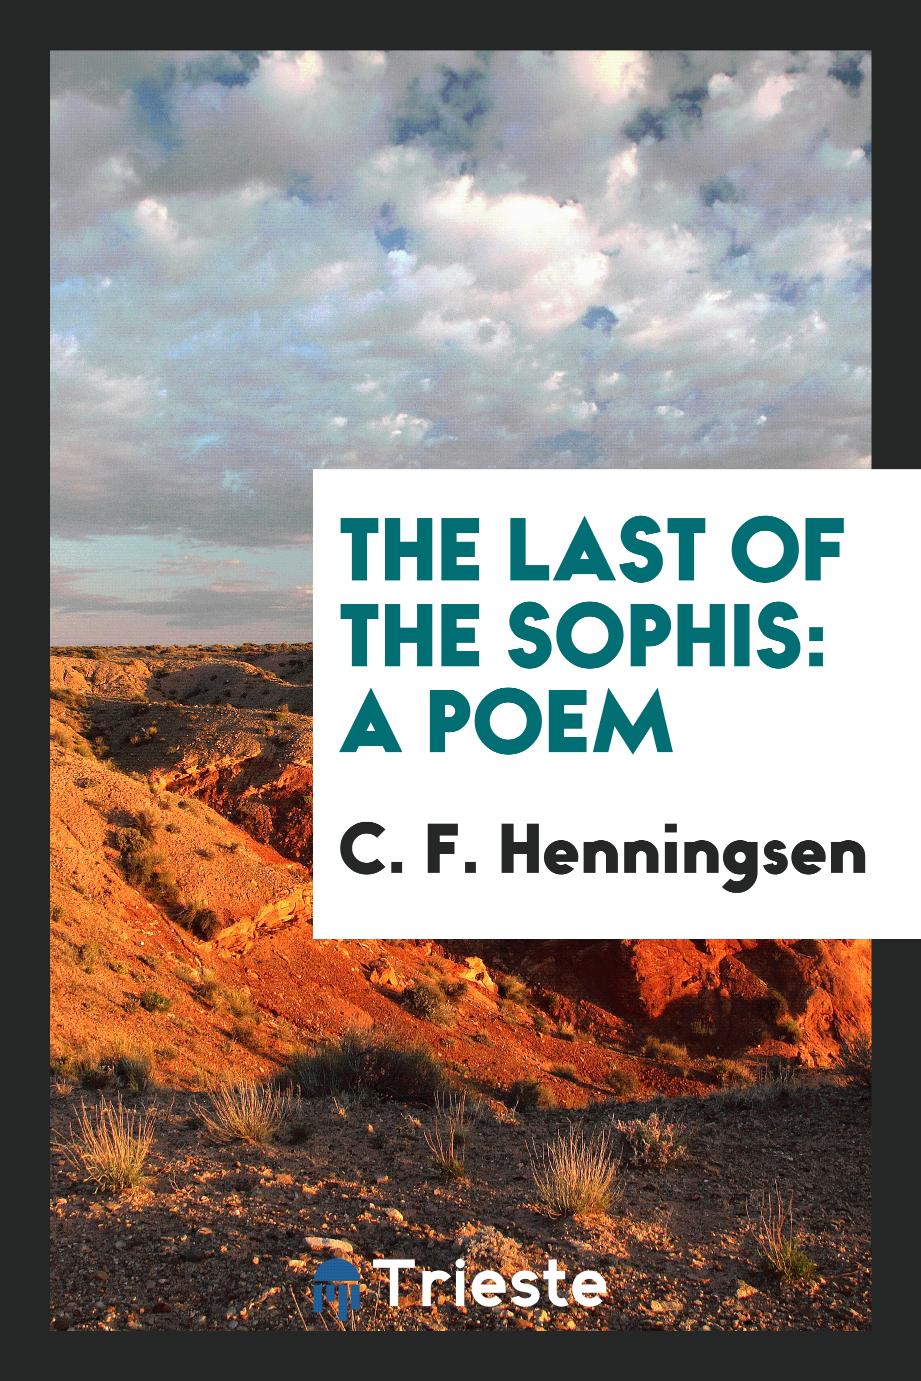 The Last of the Sophis: A Poem